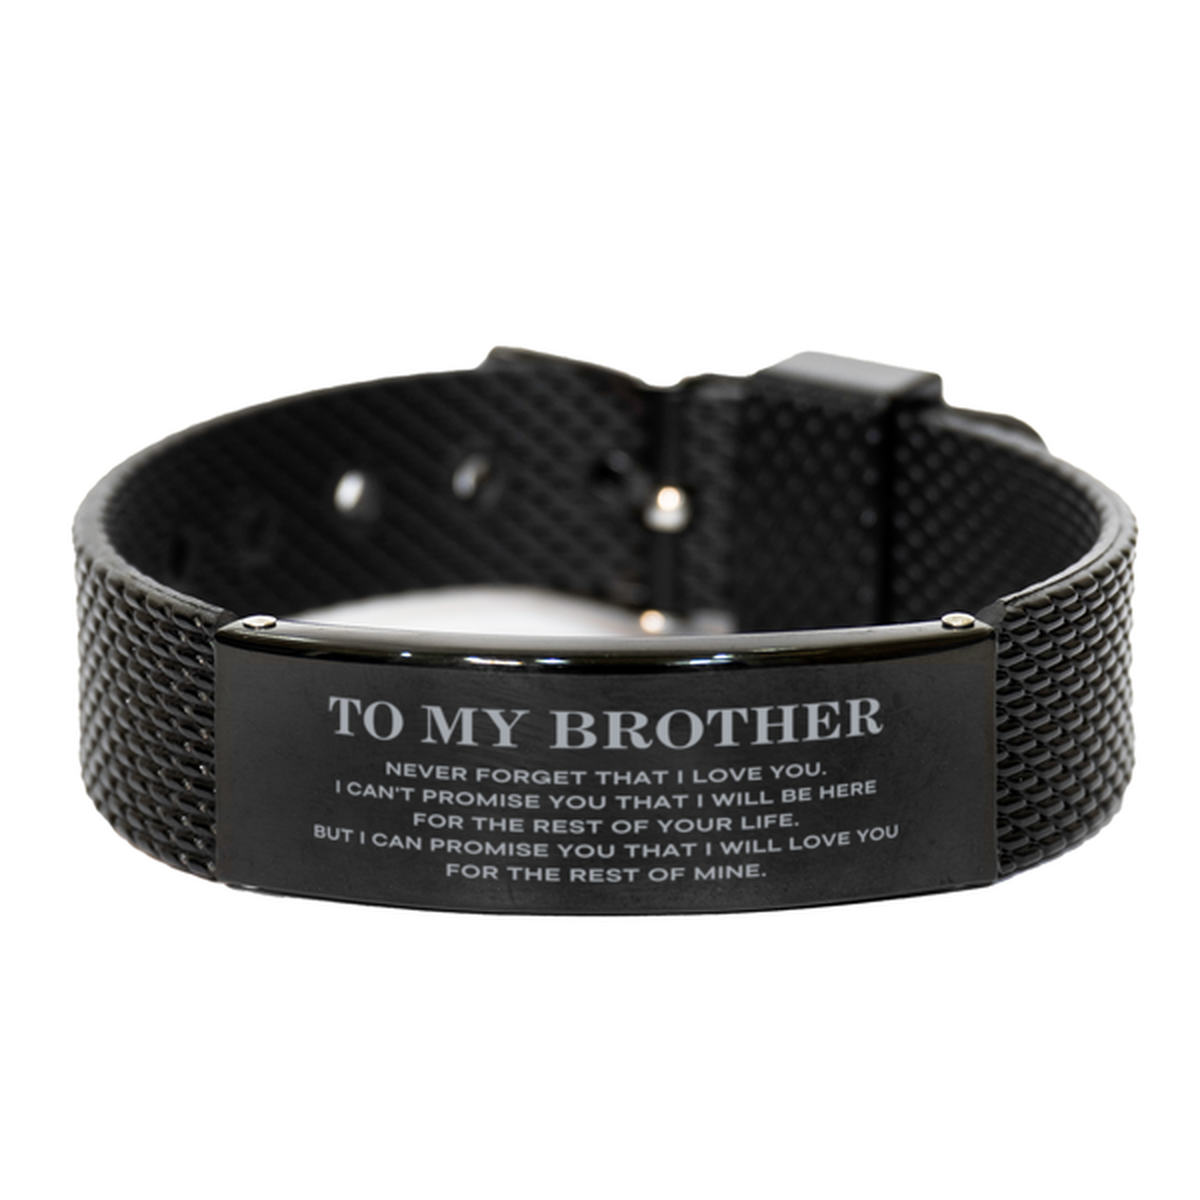 To My Brother Gifts, I will love you for the rest of mine, Love Brother Bracelet, Birthday Christmas Unique Black Shark Mesh Bracelet For Brother